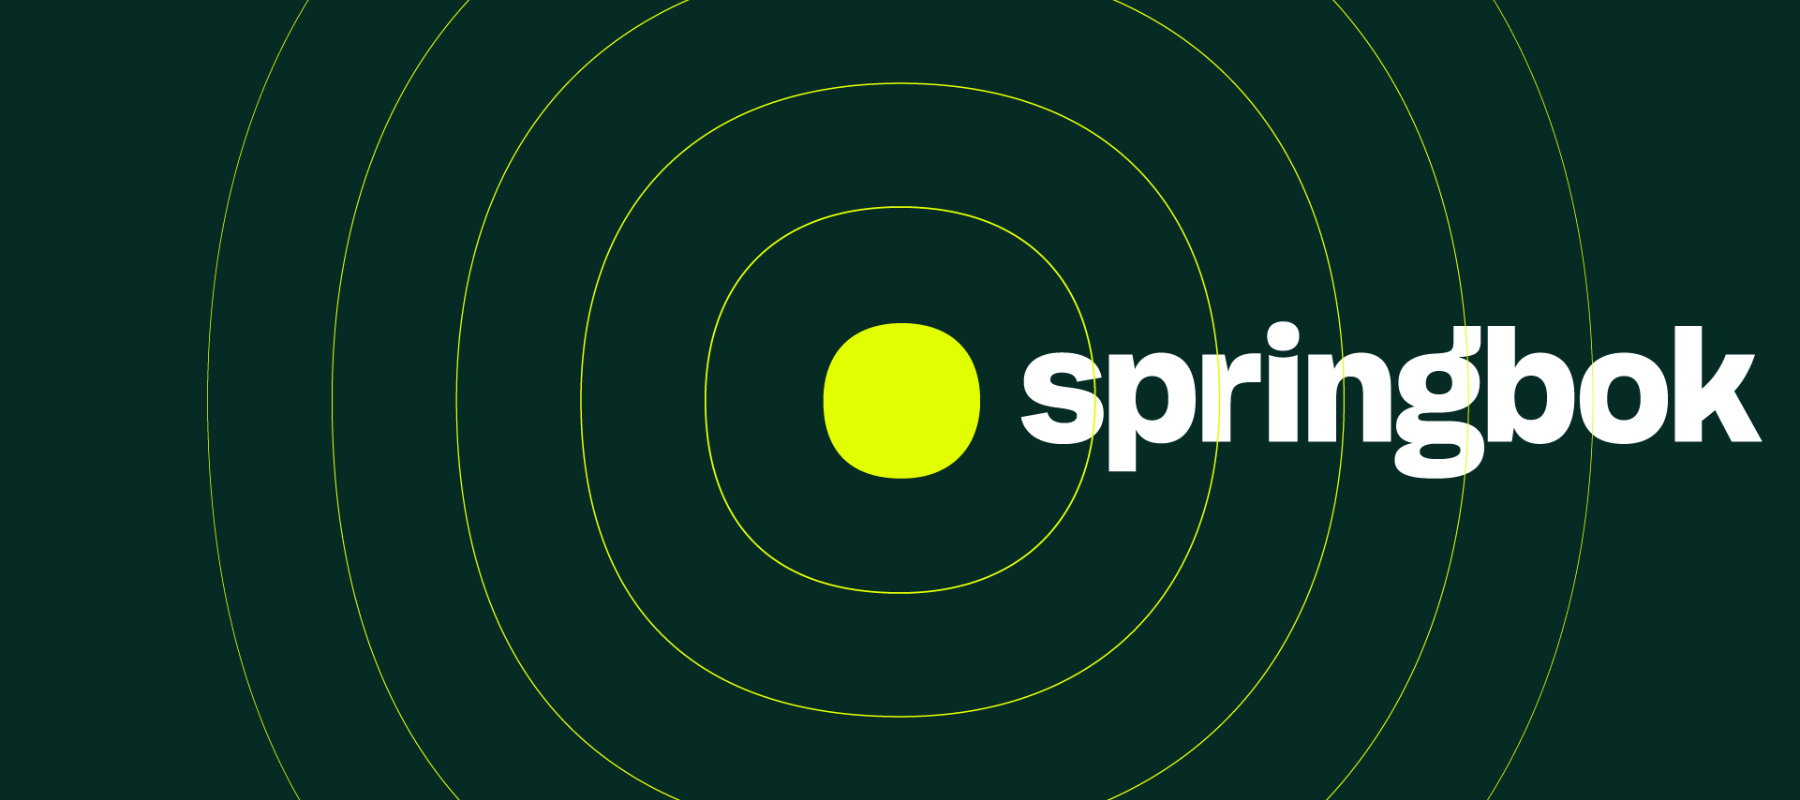 [Vacancy] Springbok has a position for an Email Specialist